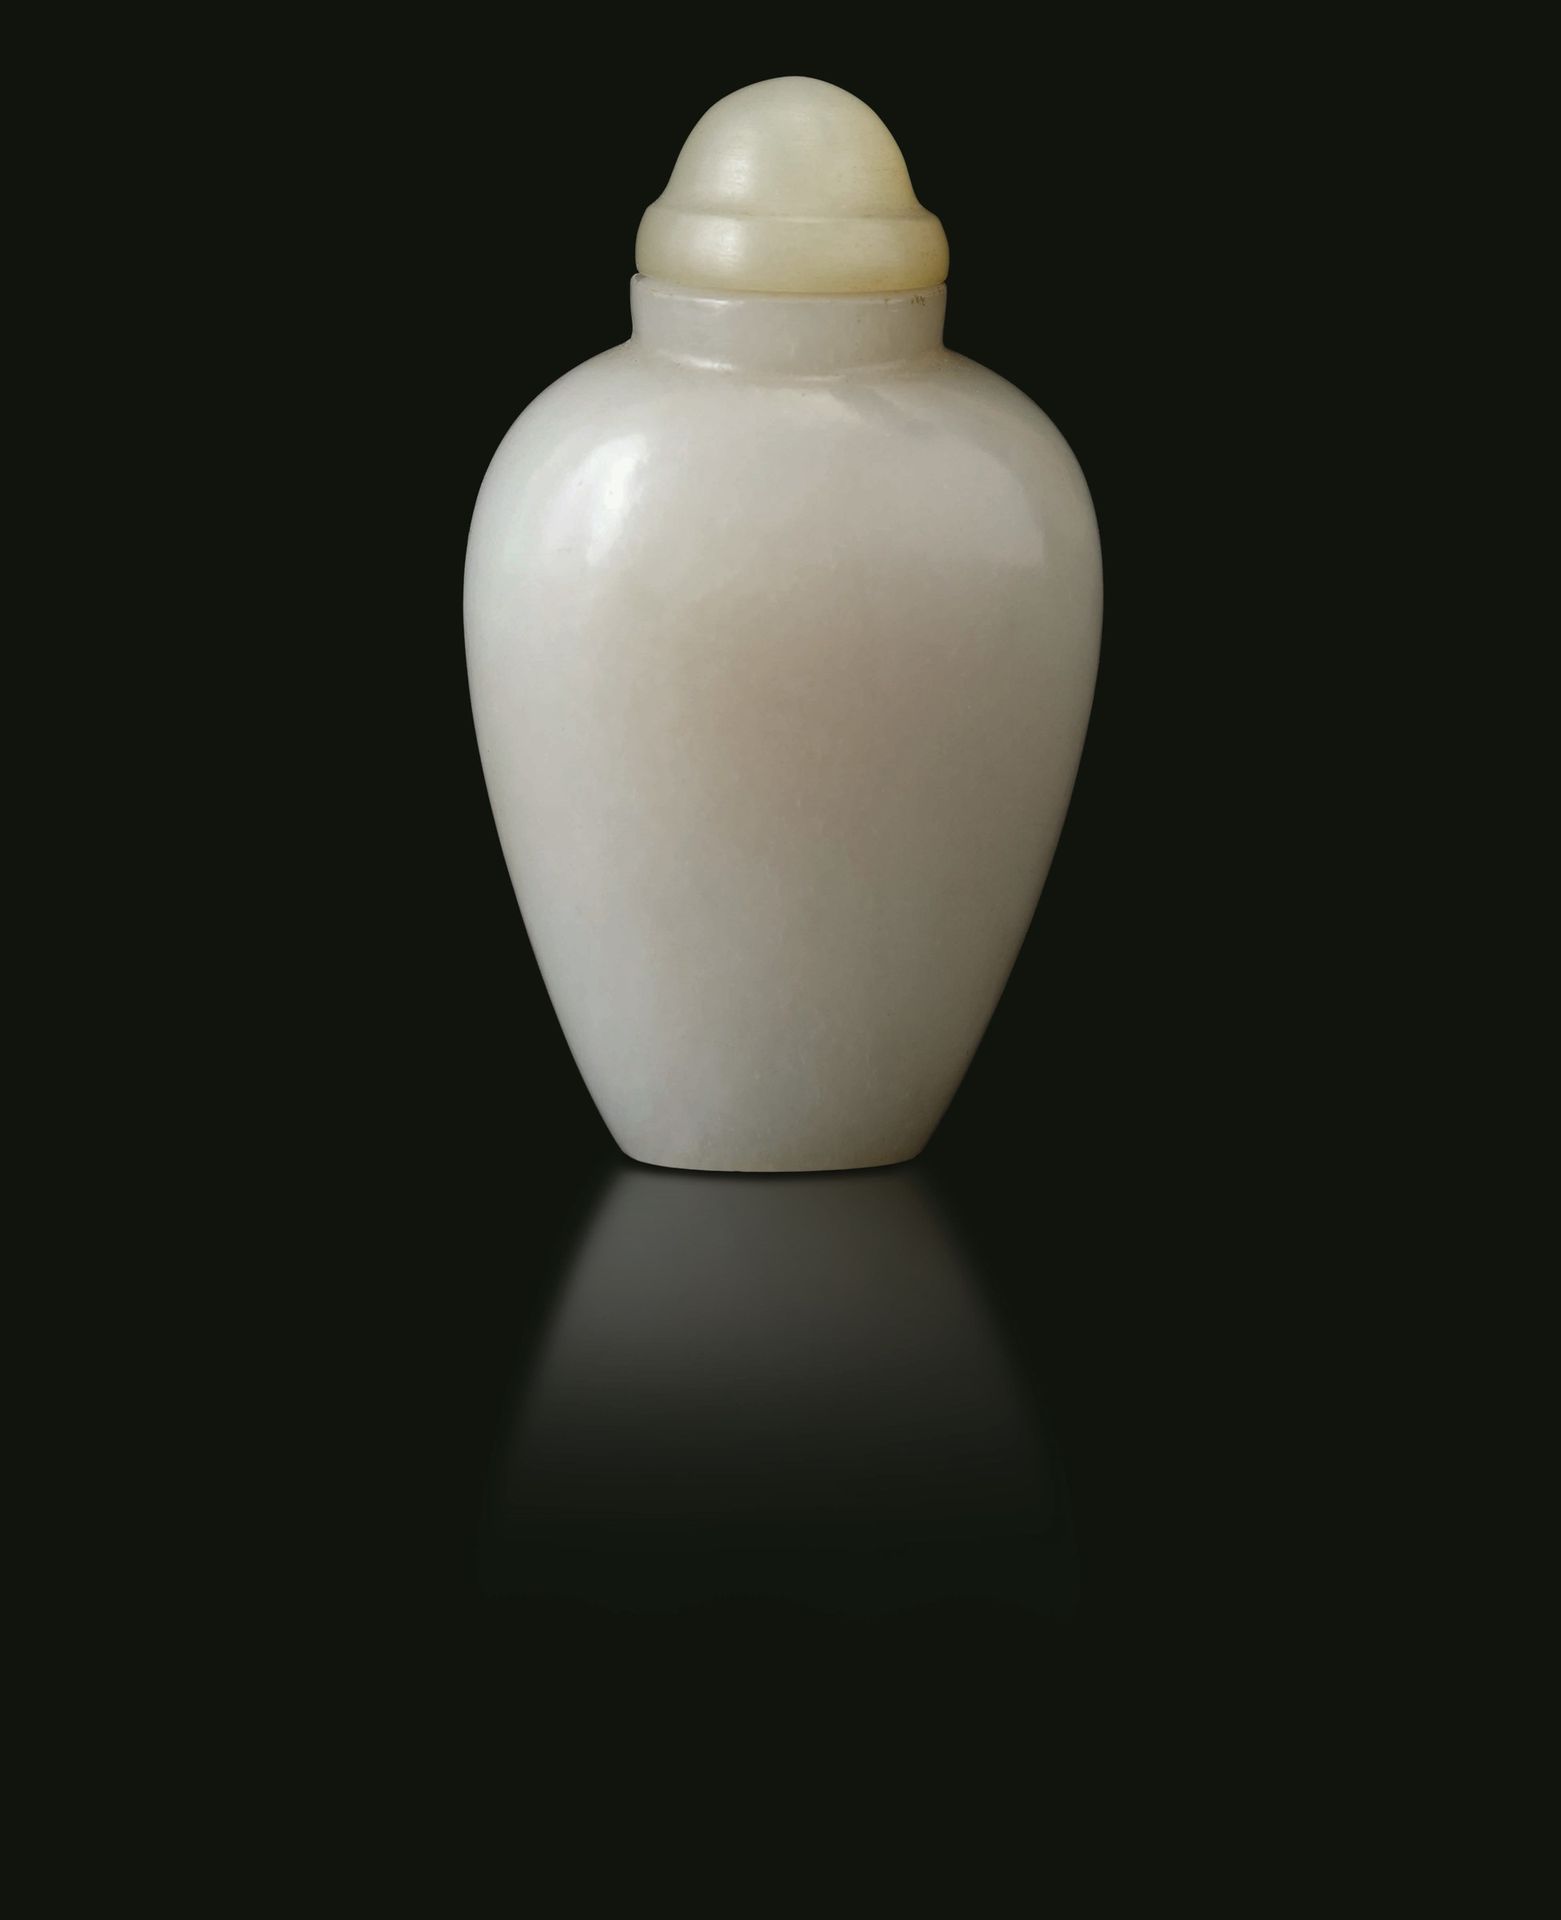 A white jade snuff bottle, China, Qing Dynasty 1800s. H 6.5cm